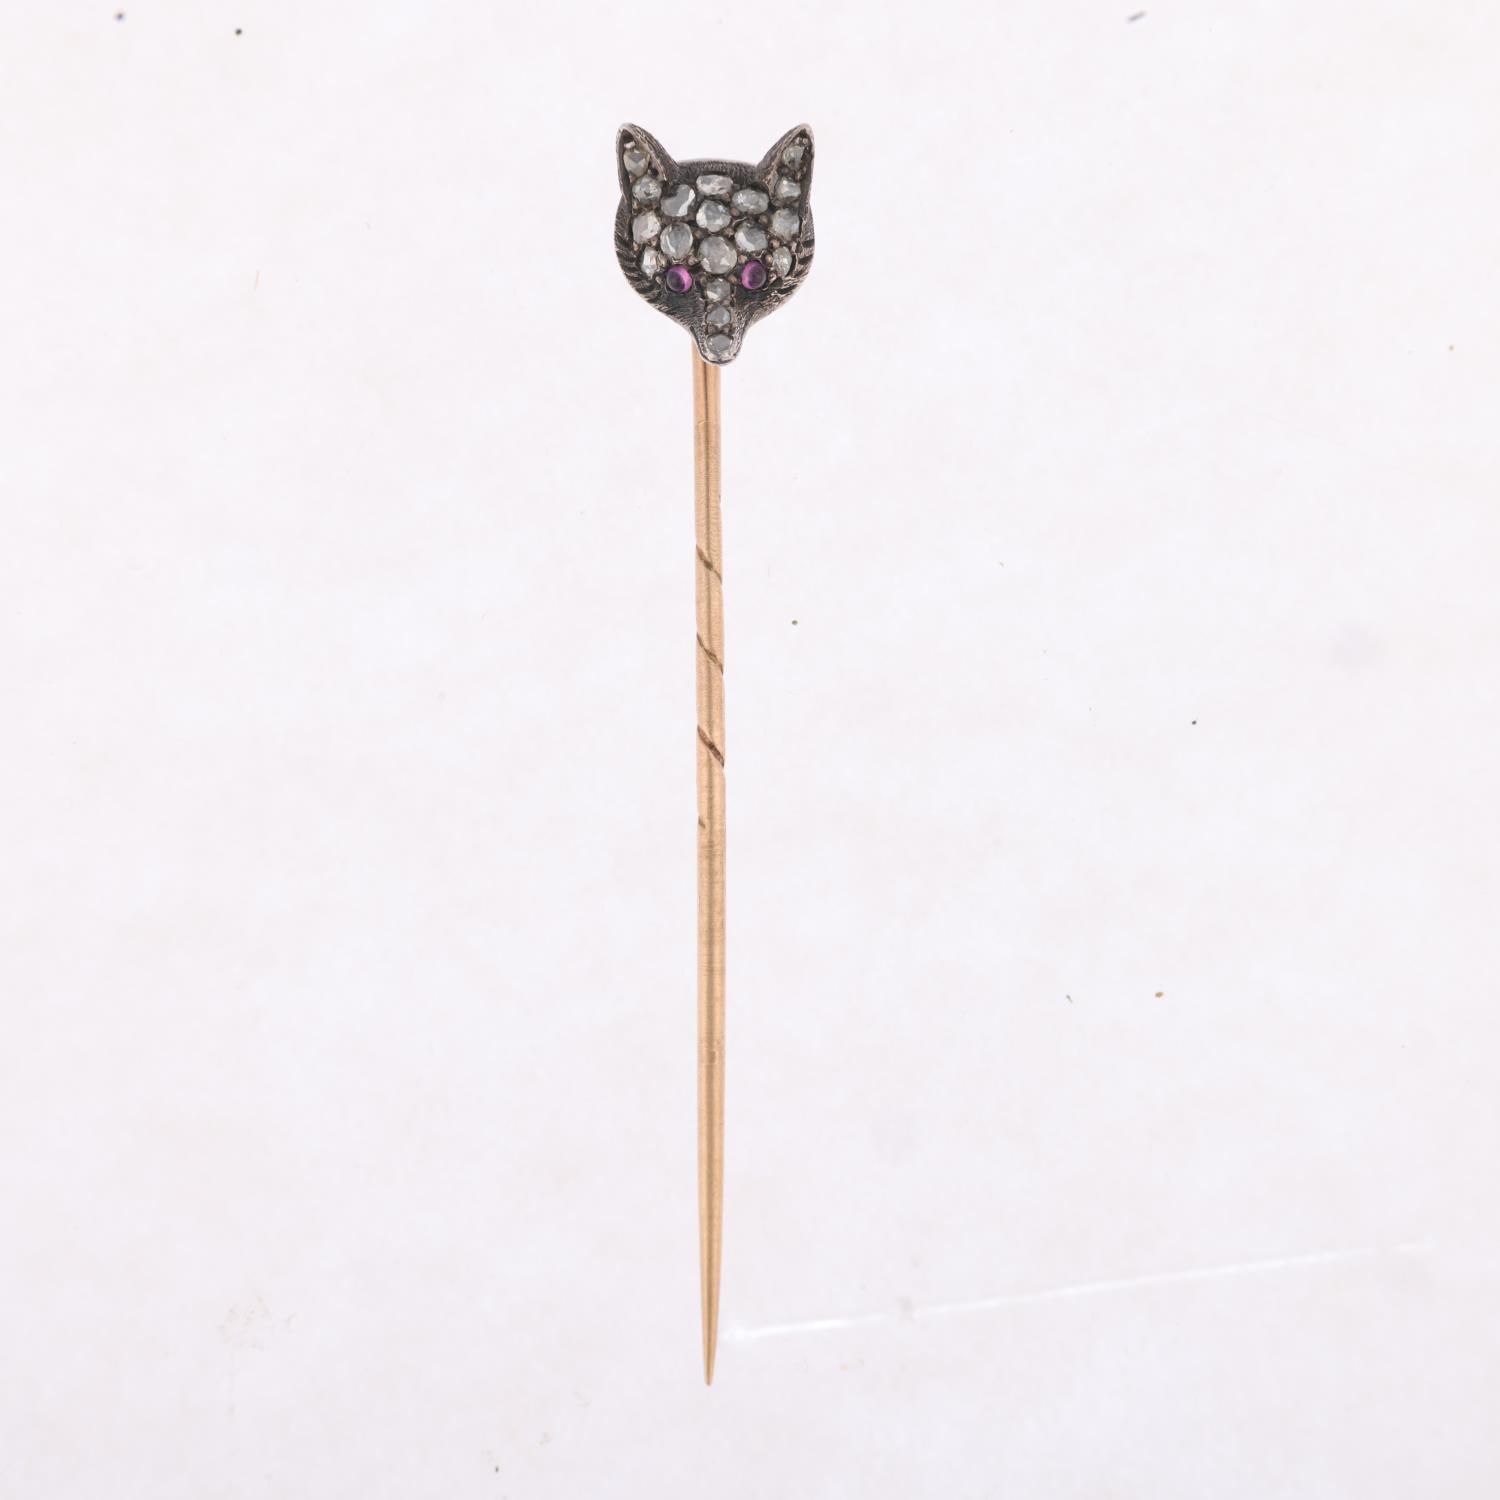 An Antique ruby and diamond fox-head stickpin, circa 1900, pave set with round cabochon ruby eyes - Image 2 of 4